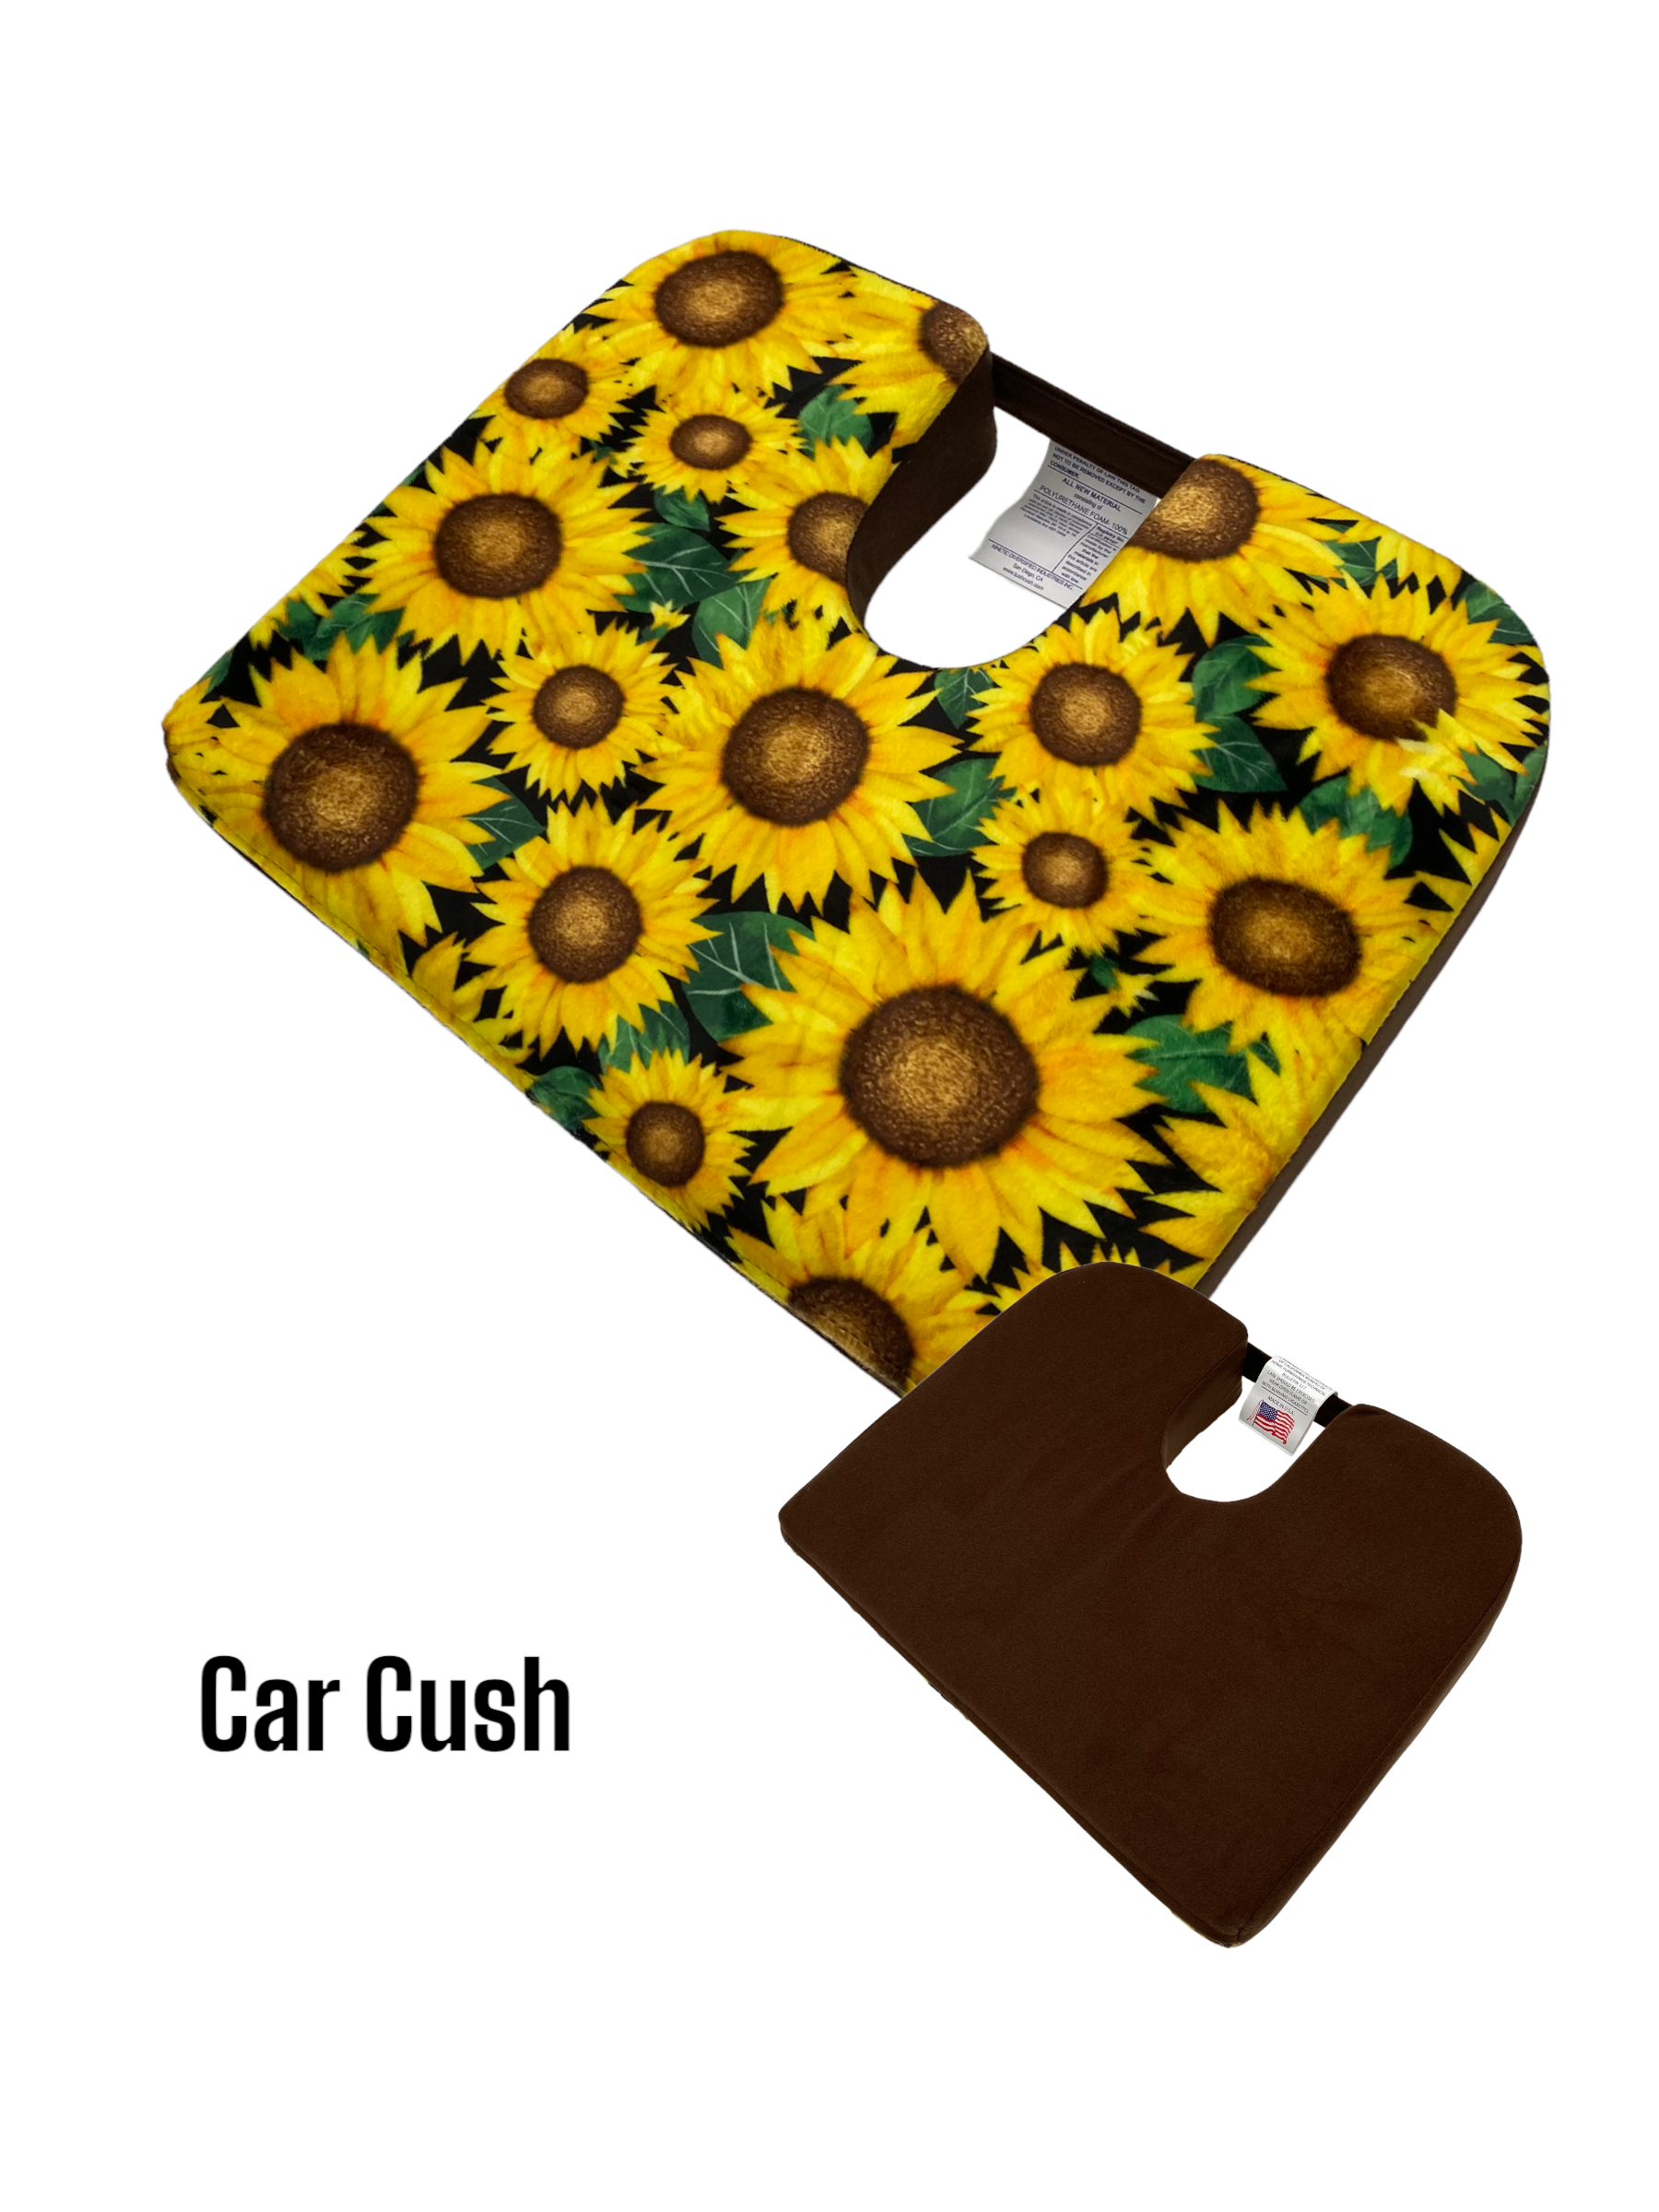 Compact Car Cush 13 x 15 With Extra Firm Foam 13 x 15 relieves